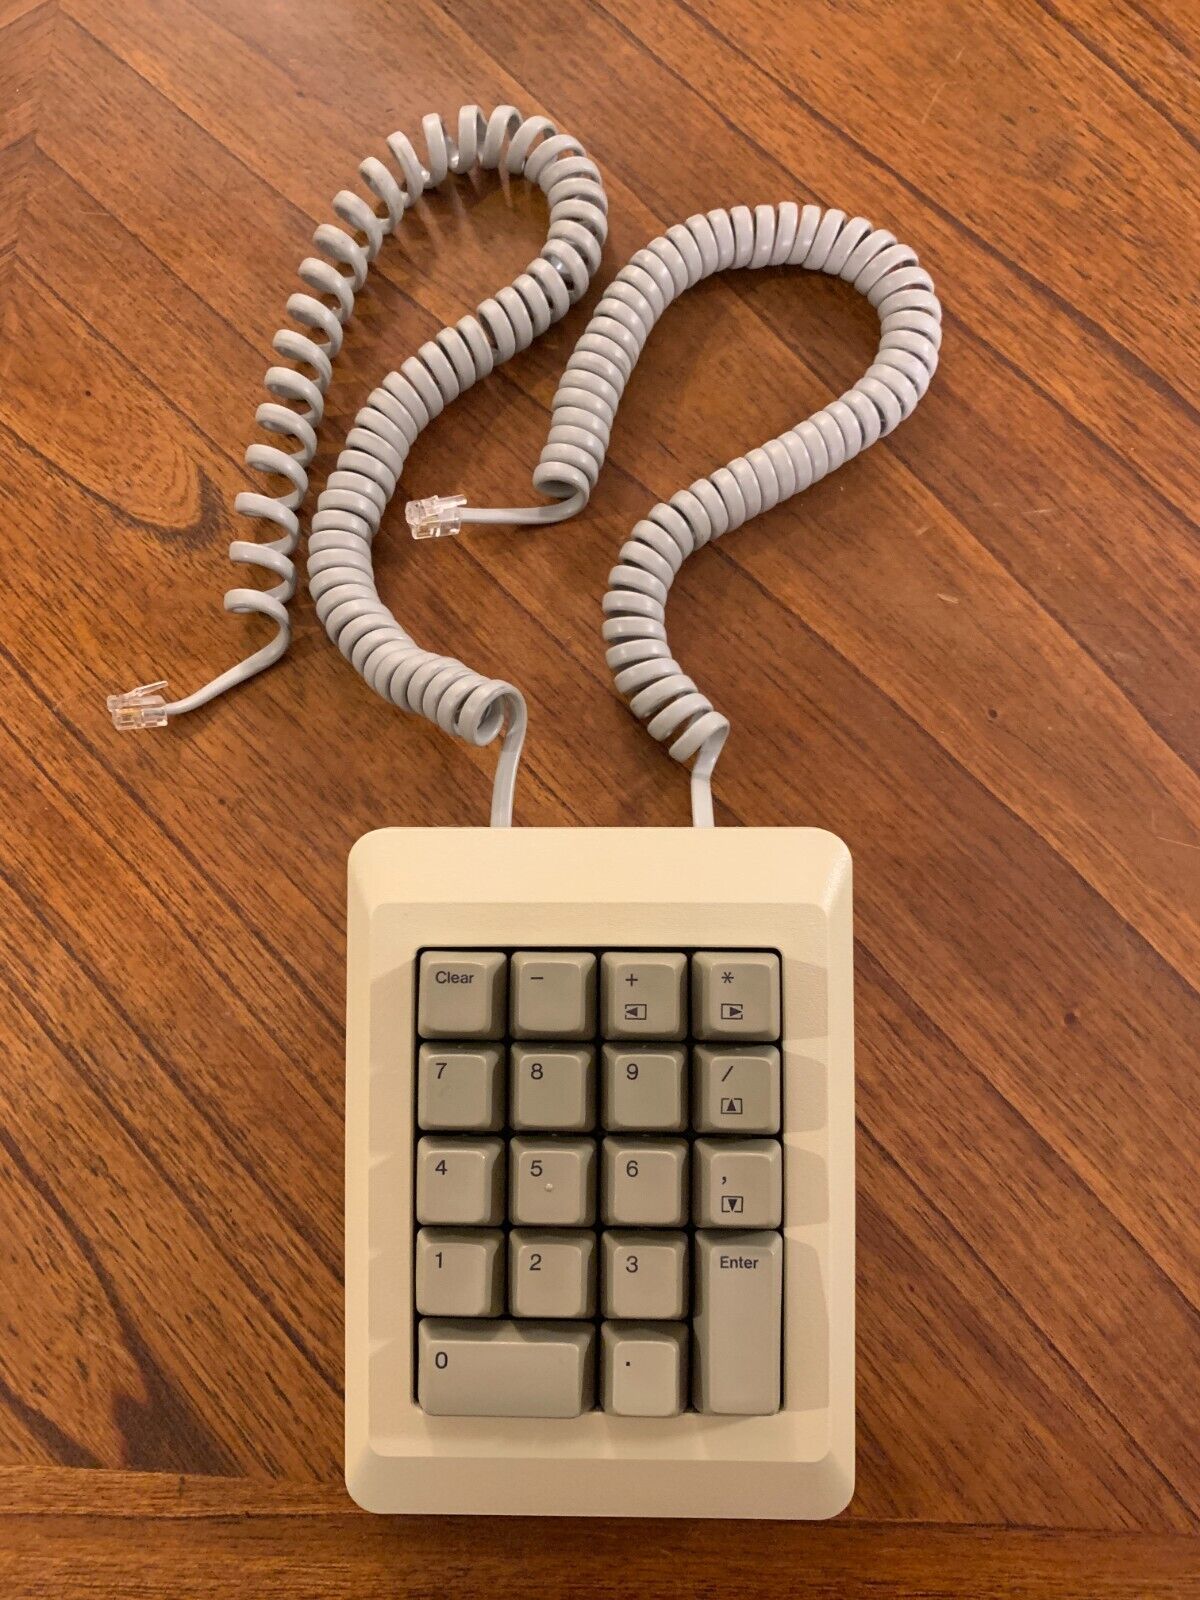 Apple M0120 Numeric Keypad w/ cable for Macintosh 128k 512k Plus - FULLY TESTED